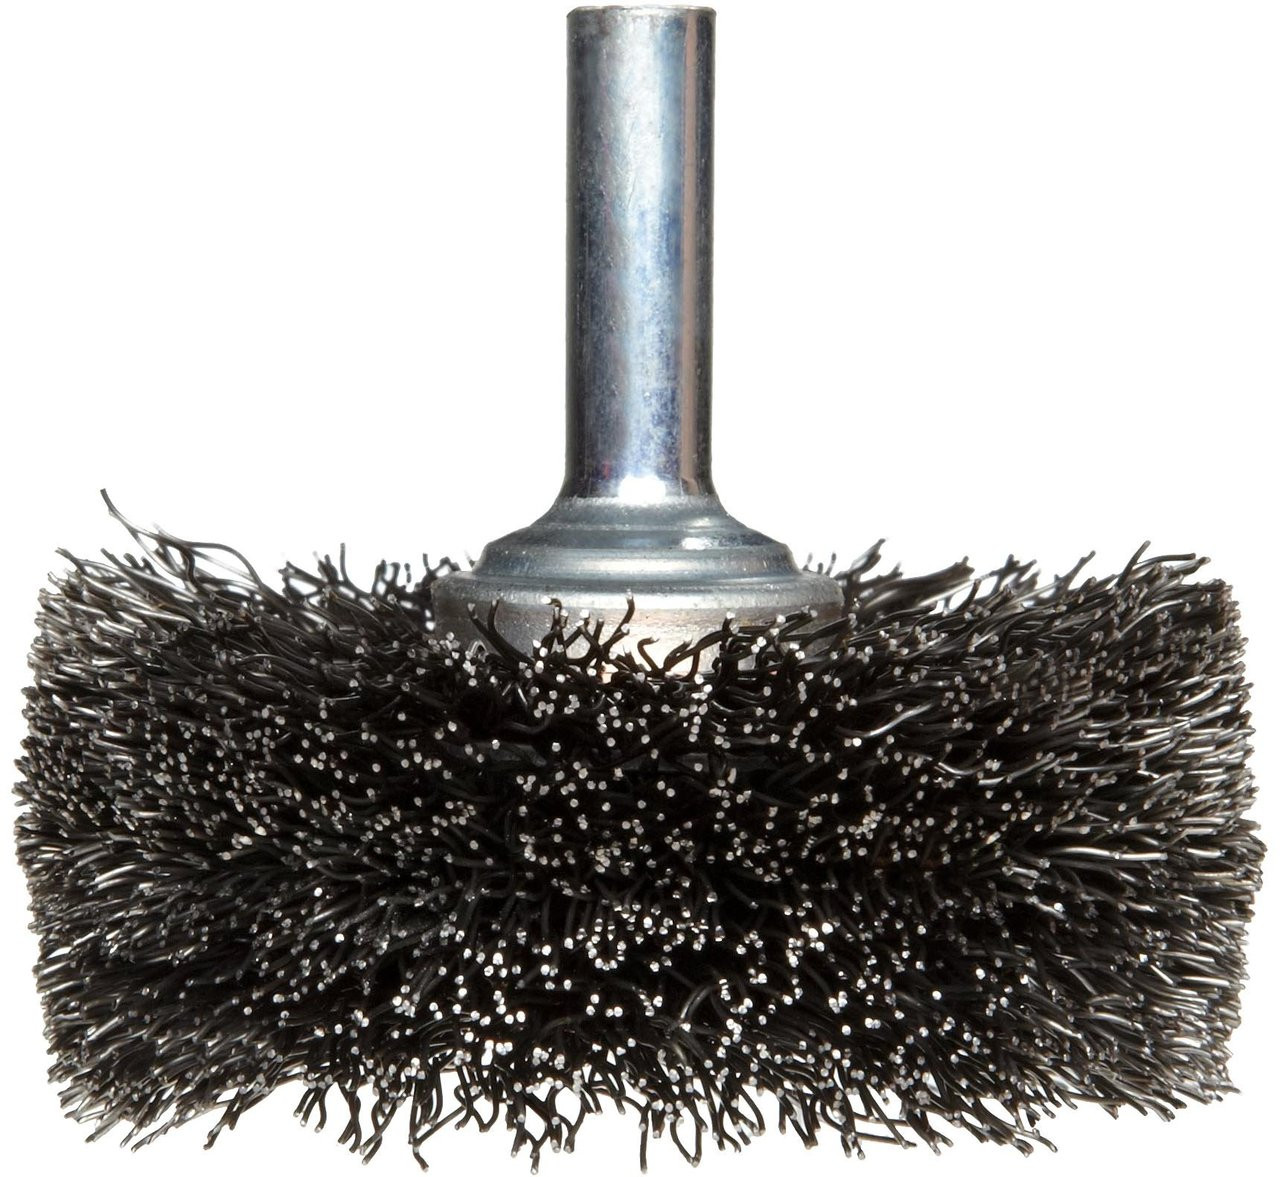 4 x .012 x 1/4 Shank Mounted Crimped Wire Wheel Brush (Stainless Steel)